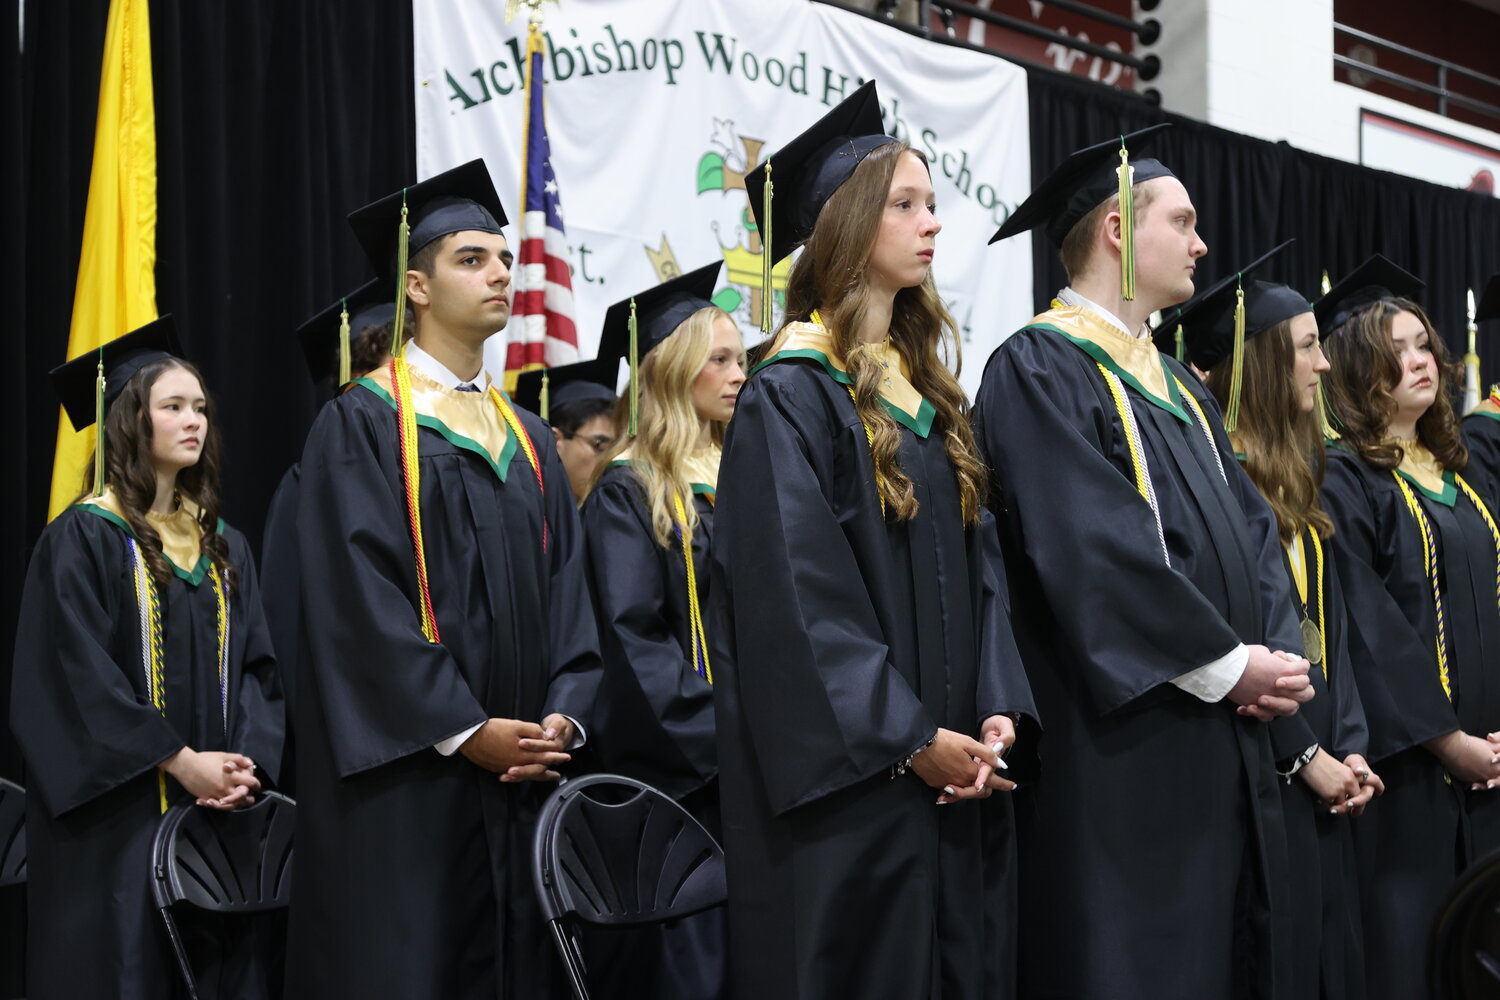 Seniors stand at attention during the Archbishop Wood graduation.